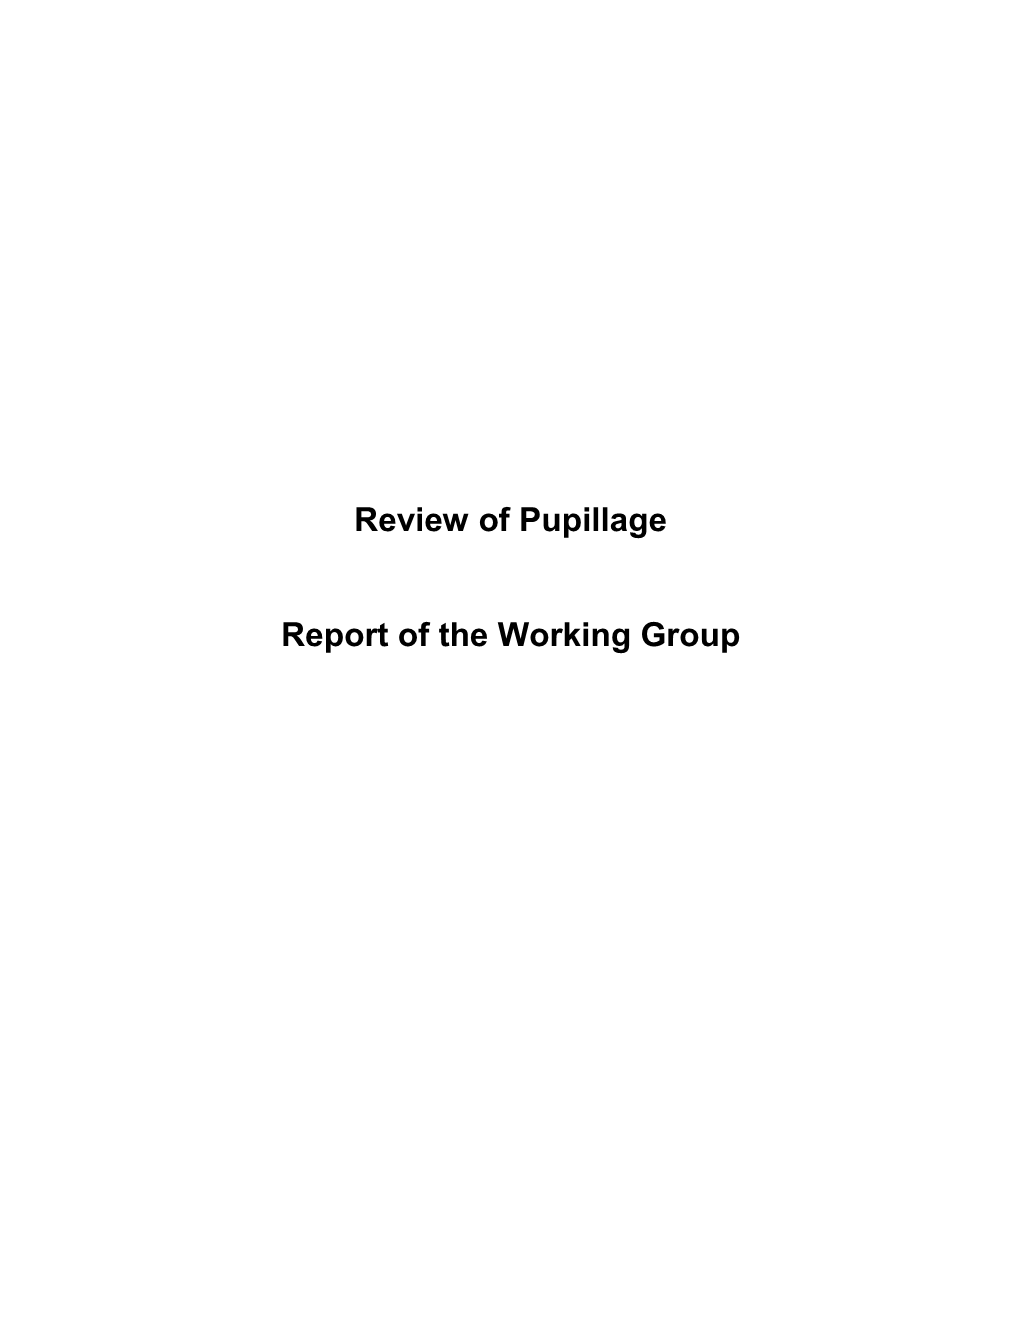 Review of Pupillage Report of the Working Group